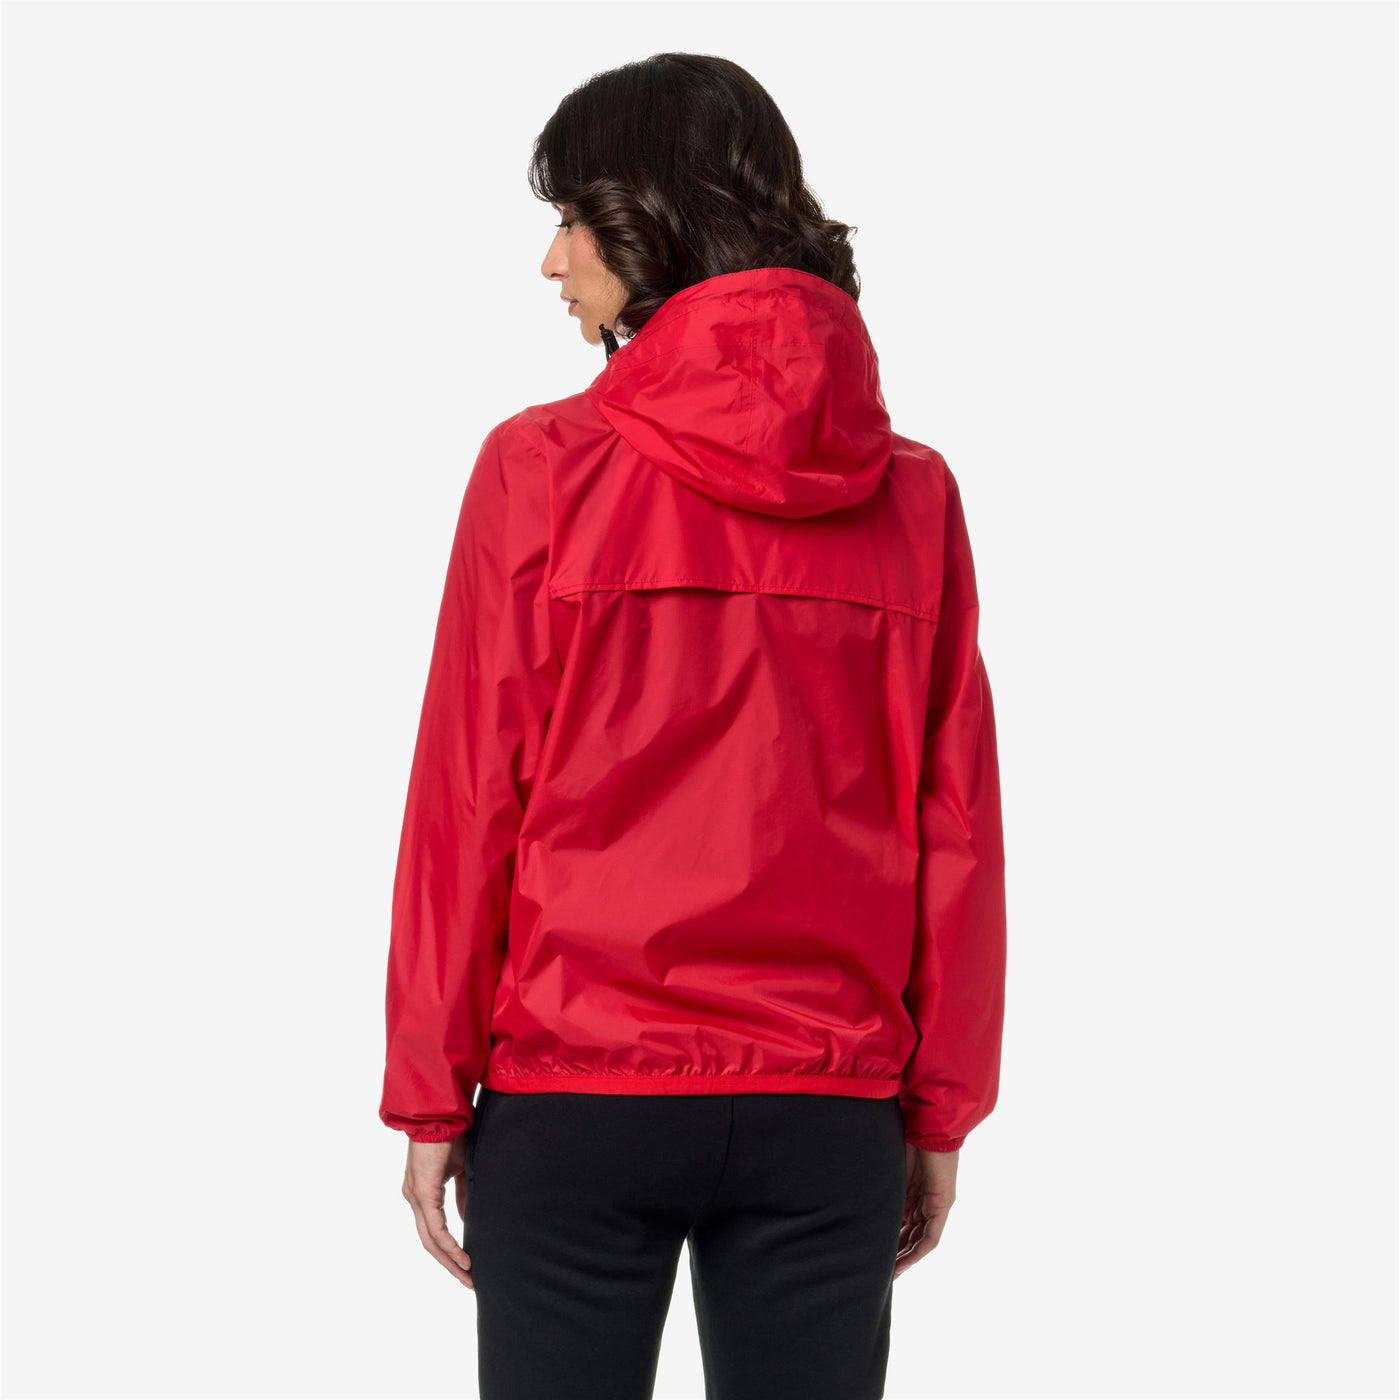 Jackets Unisex LE VRAI 3.0 CLAUDE Mid RED Dressed Front Double		